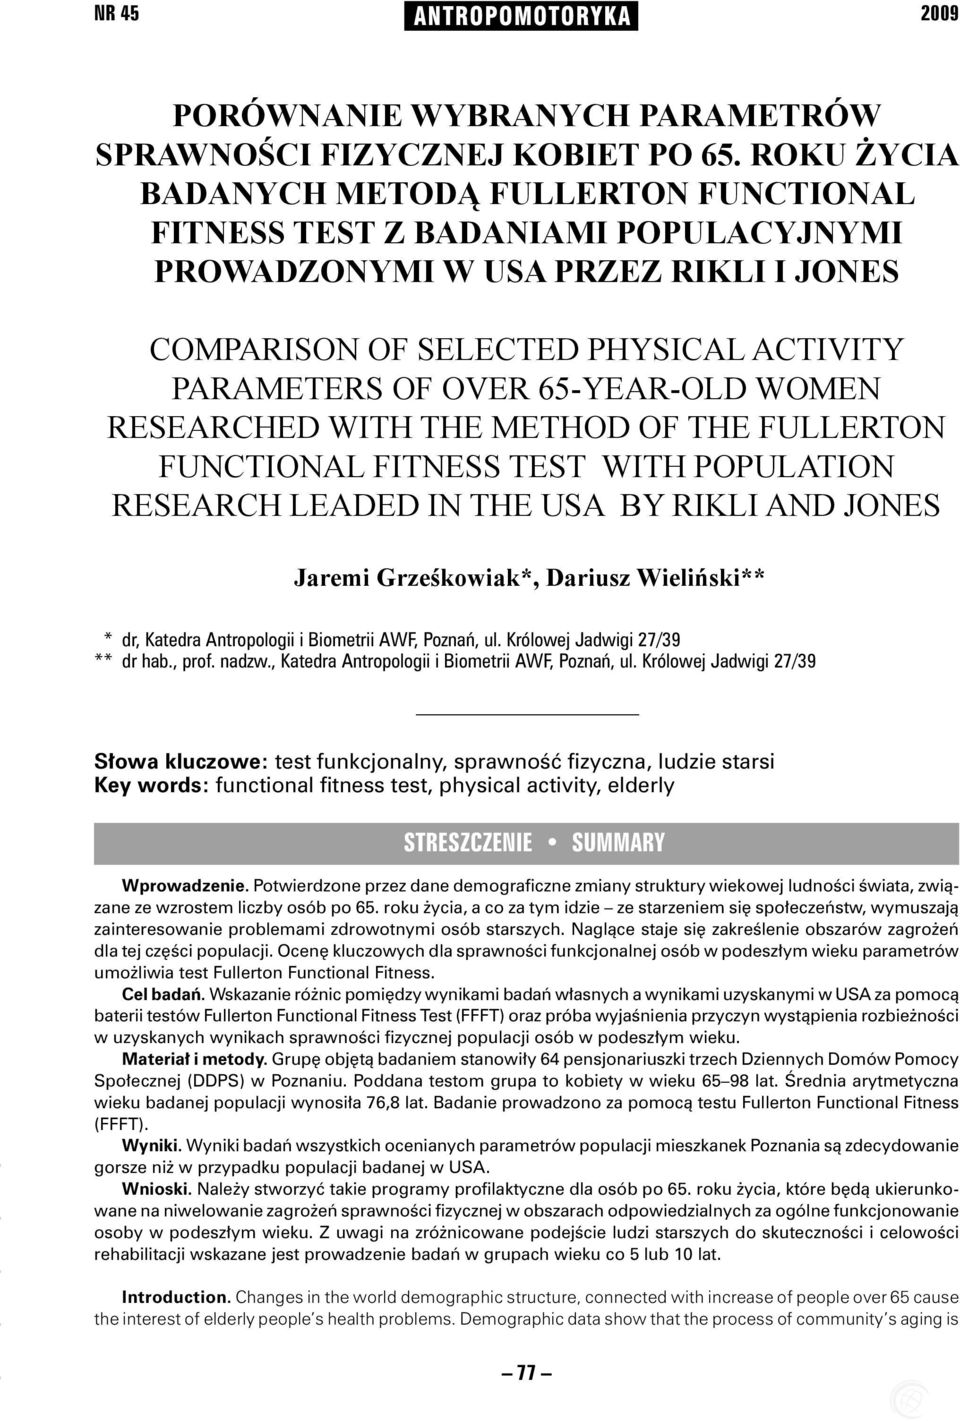 WOMEN RESEARCHED WITH THE METHOD OF THE FULLERTON FUNCTIONAL FITNESS TEST WITH POPULATION RESEARCH LEADED IN THE USA BY RIKLI AND JONES Jaremi Grześkowiak*, Dariusz Wieliński** ***dr, Katedra